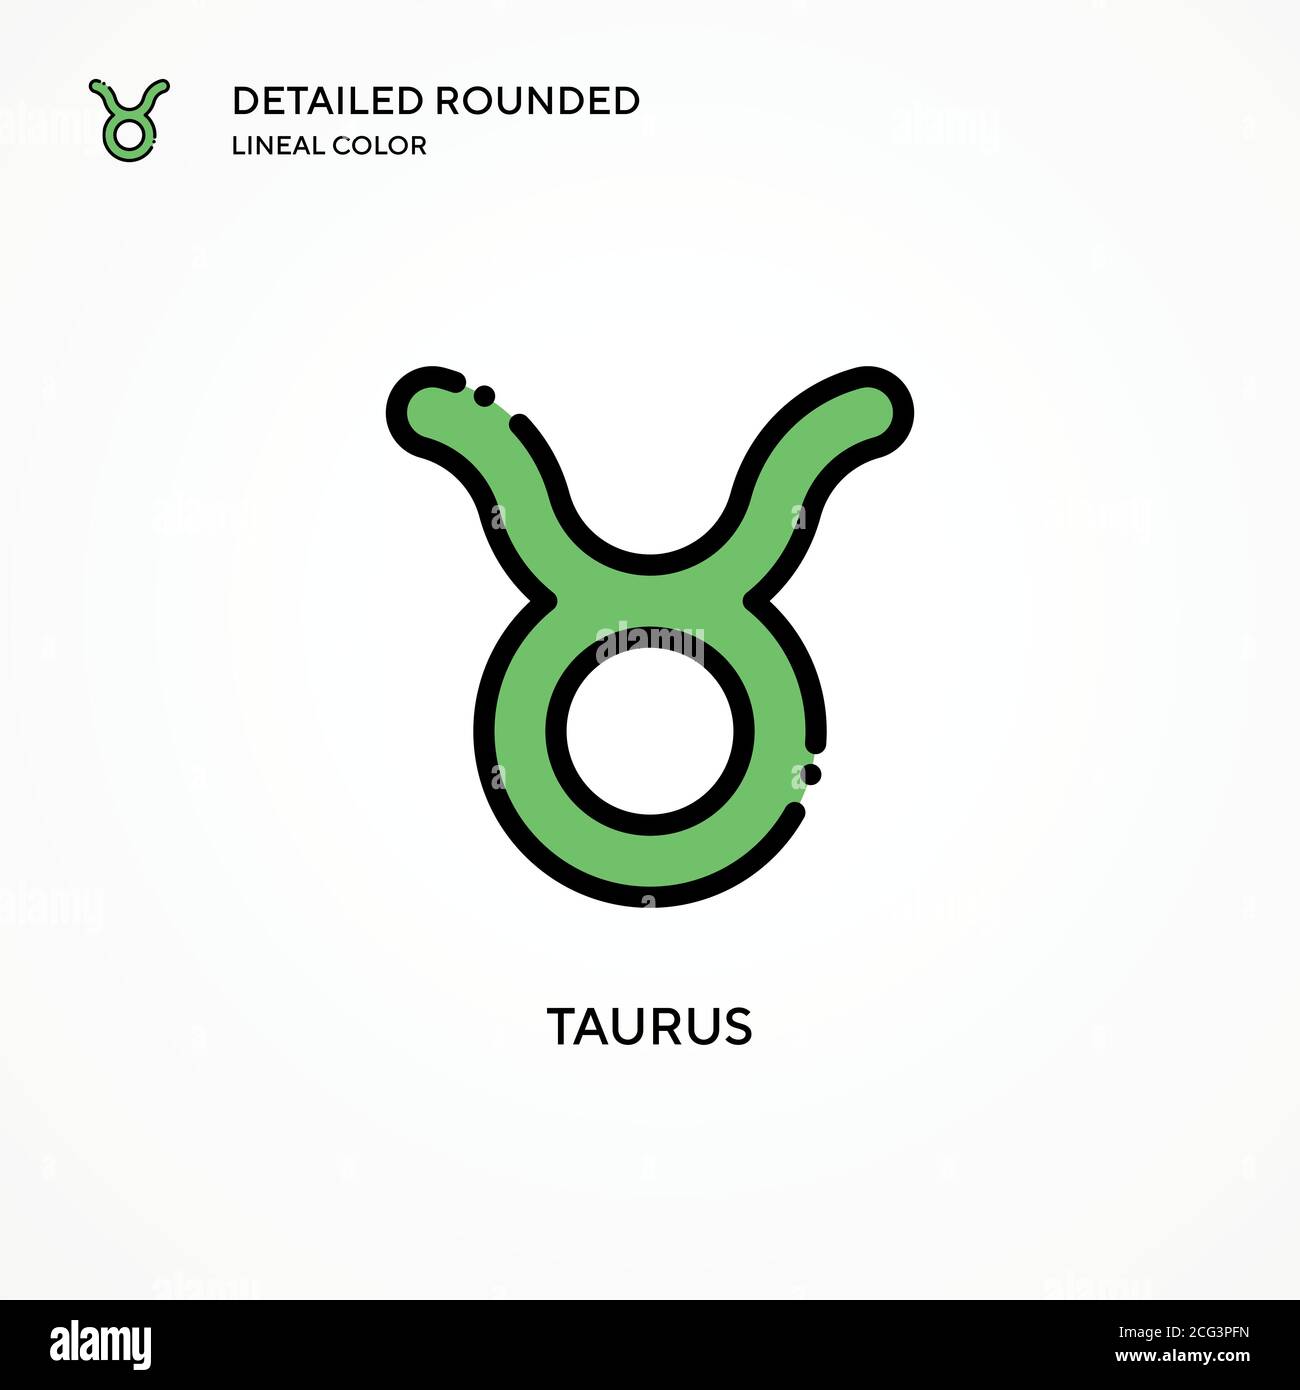 Taurus vector icon. Modern vector illustration concepts. Easy to edit and customize. Stock Vector